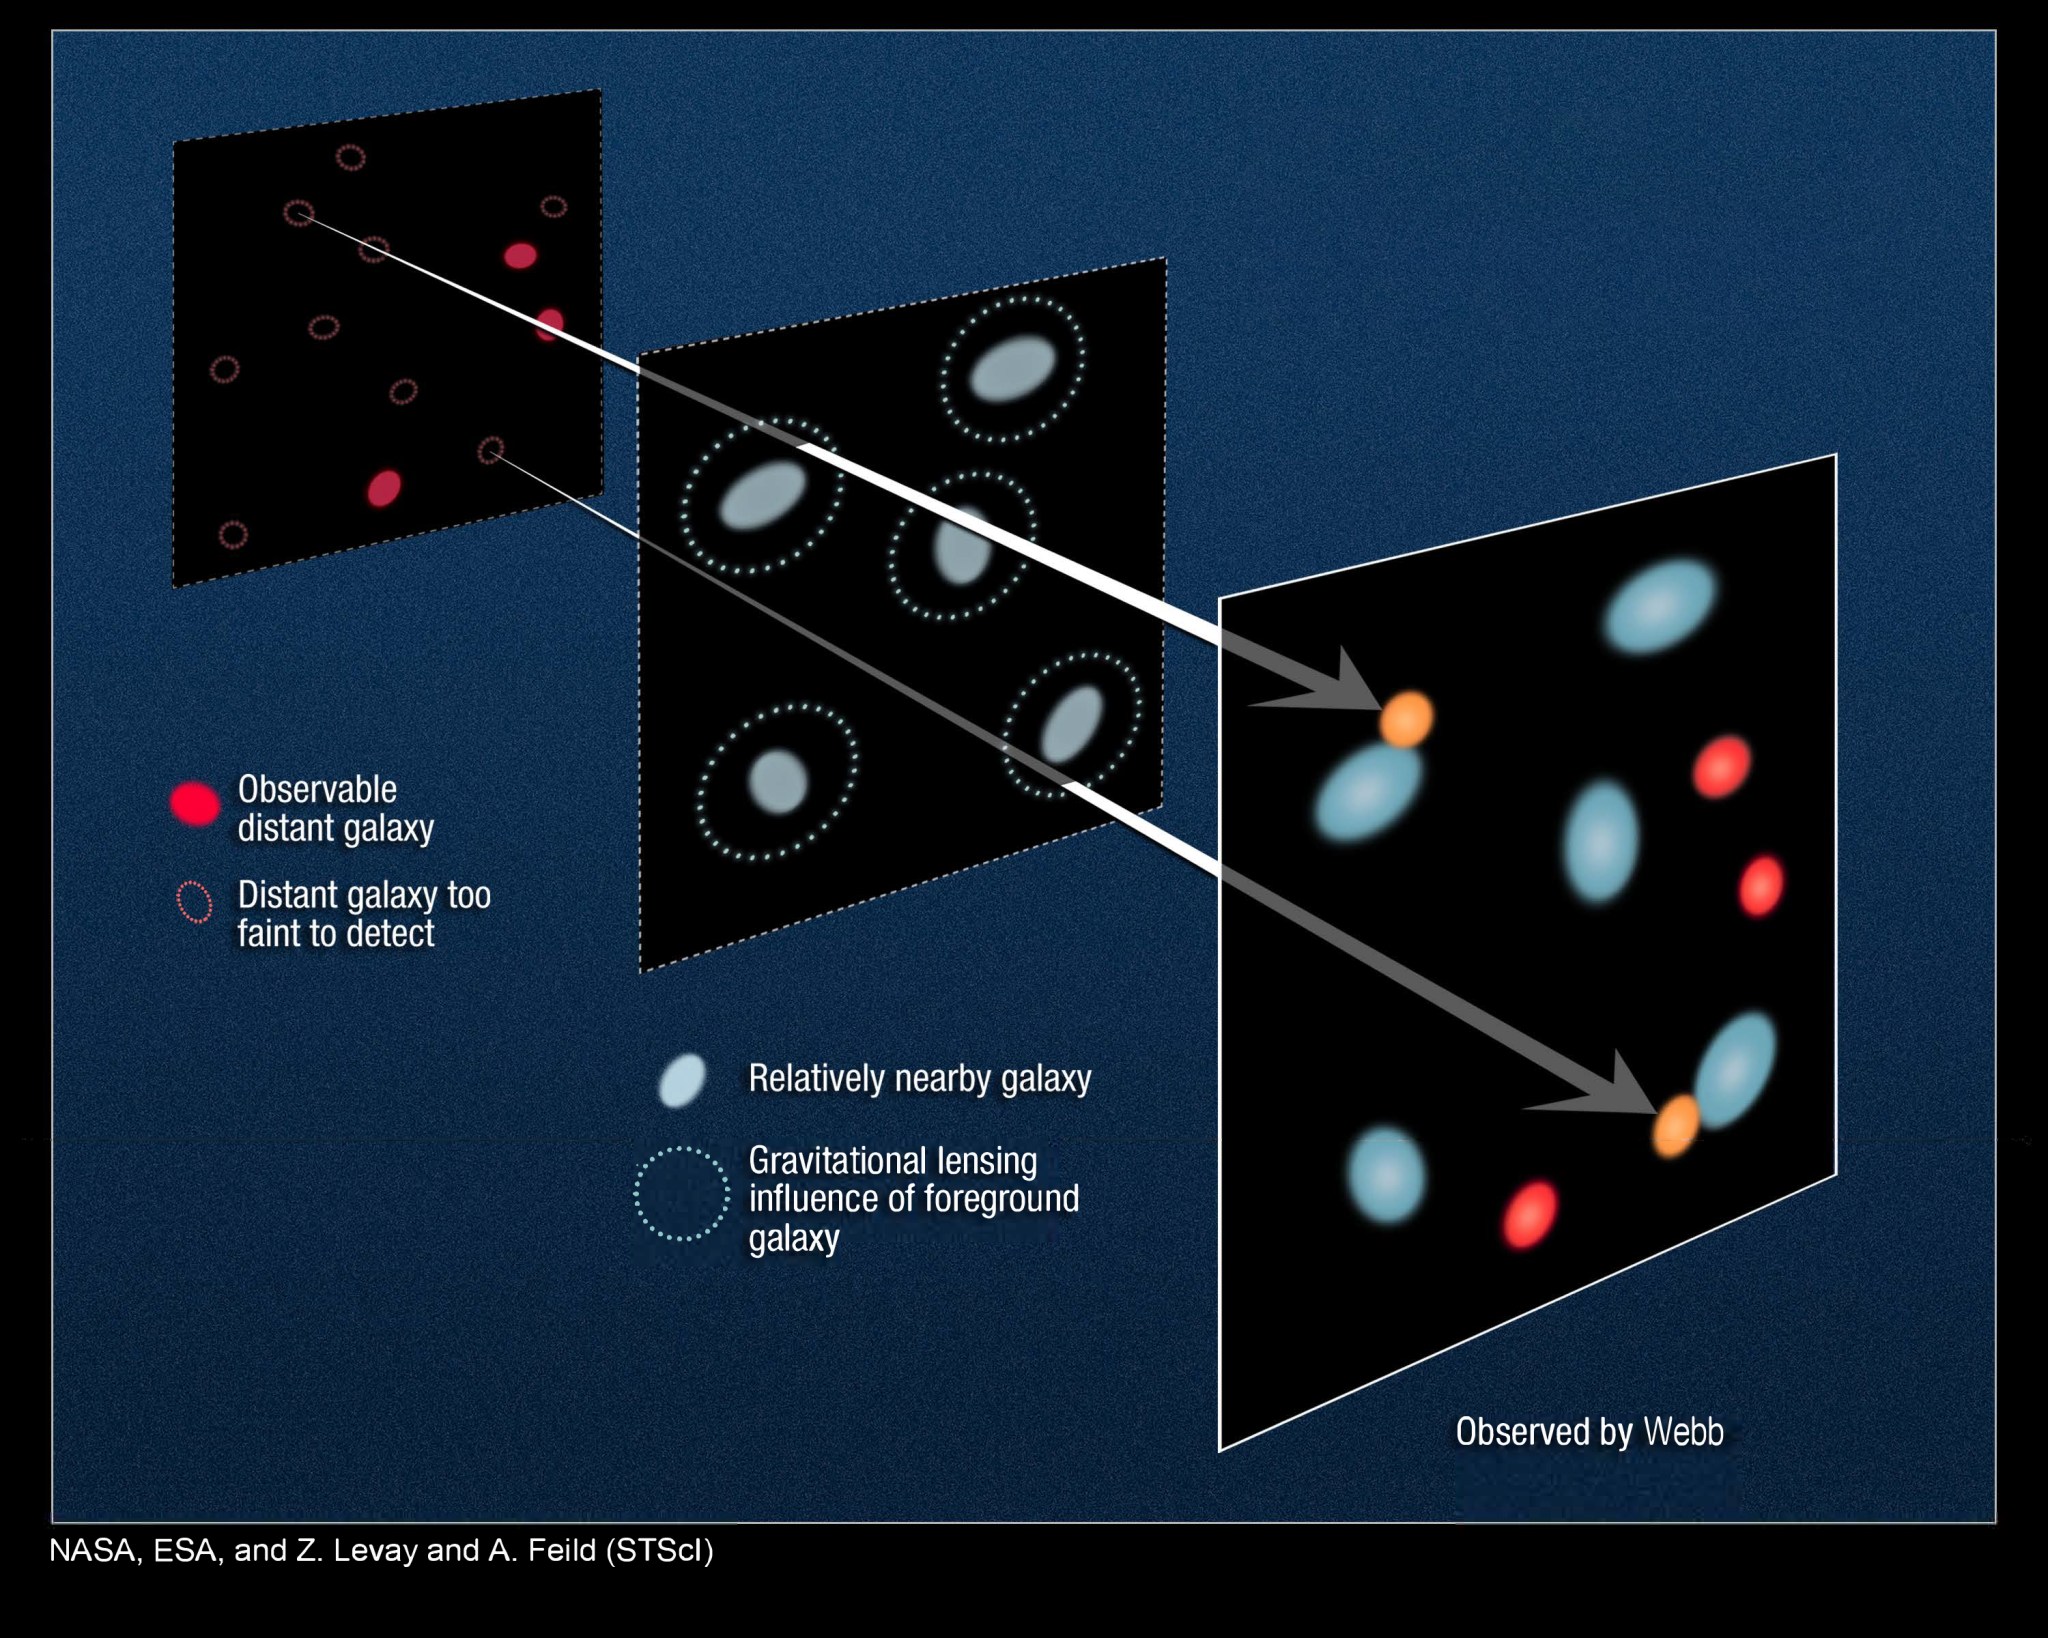 This diagram illustrates how gravitational lensing by foreground galaxies influences the appearance of far more distant back.